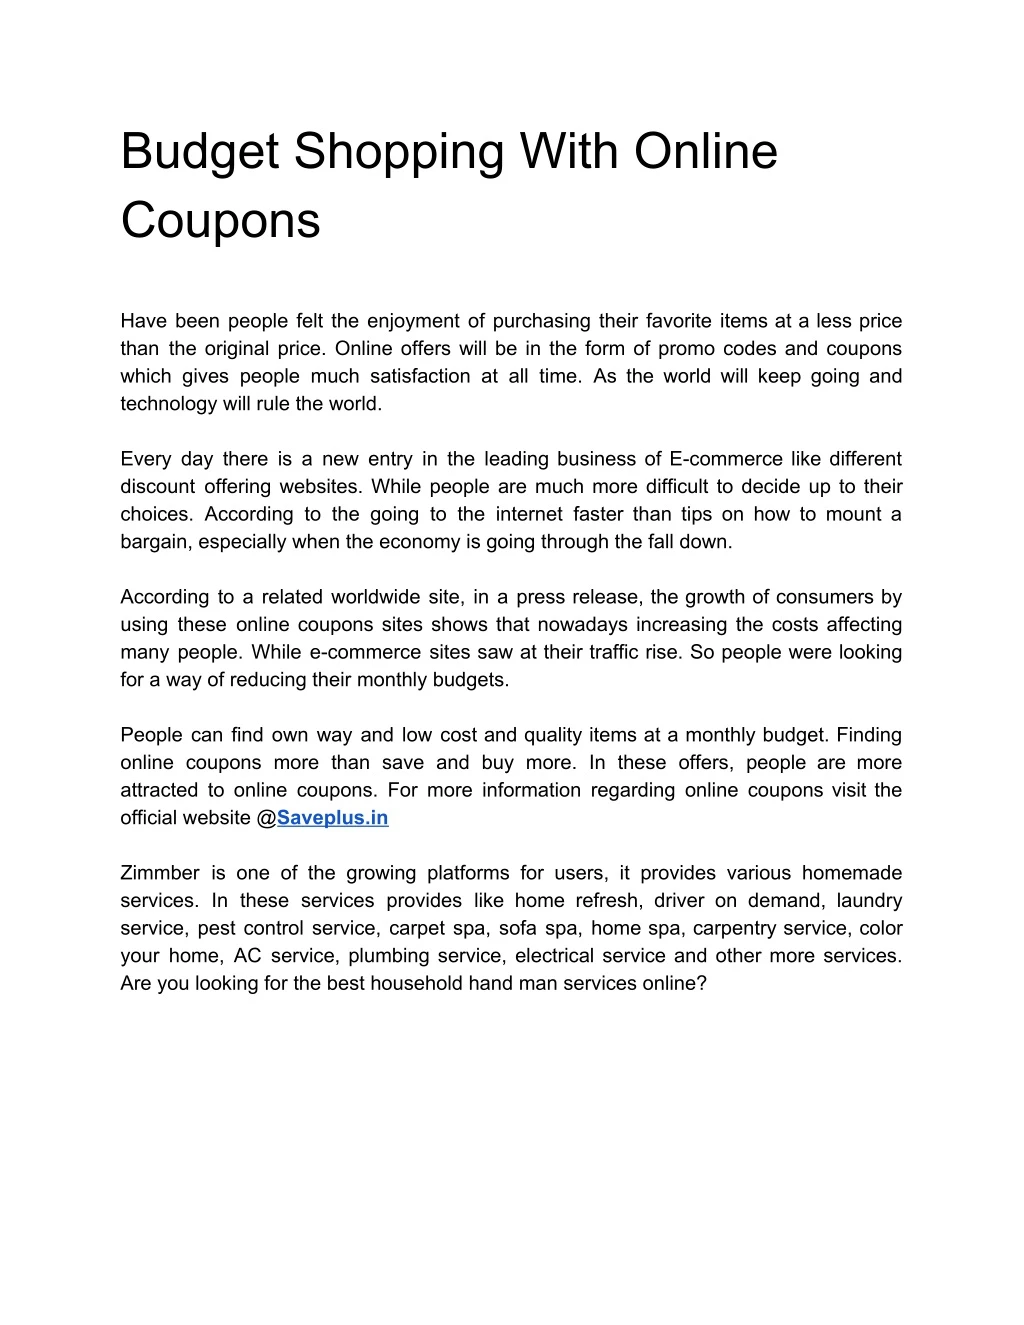 budget shopping with online coupons